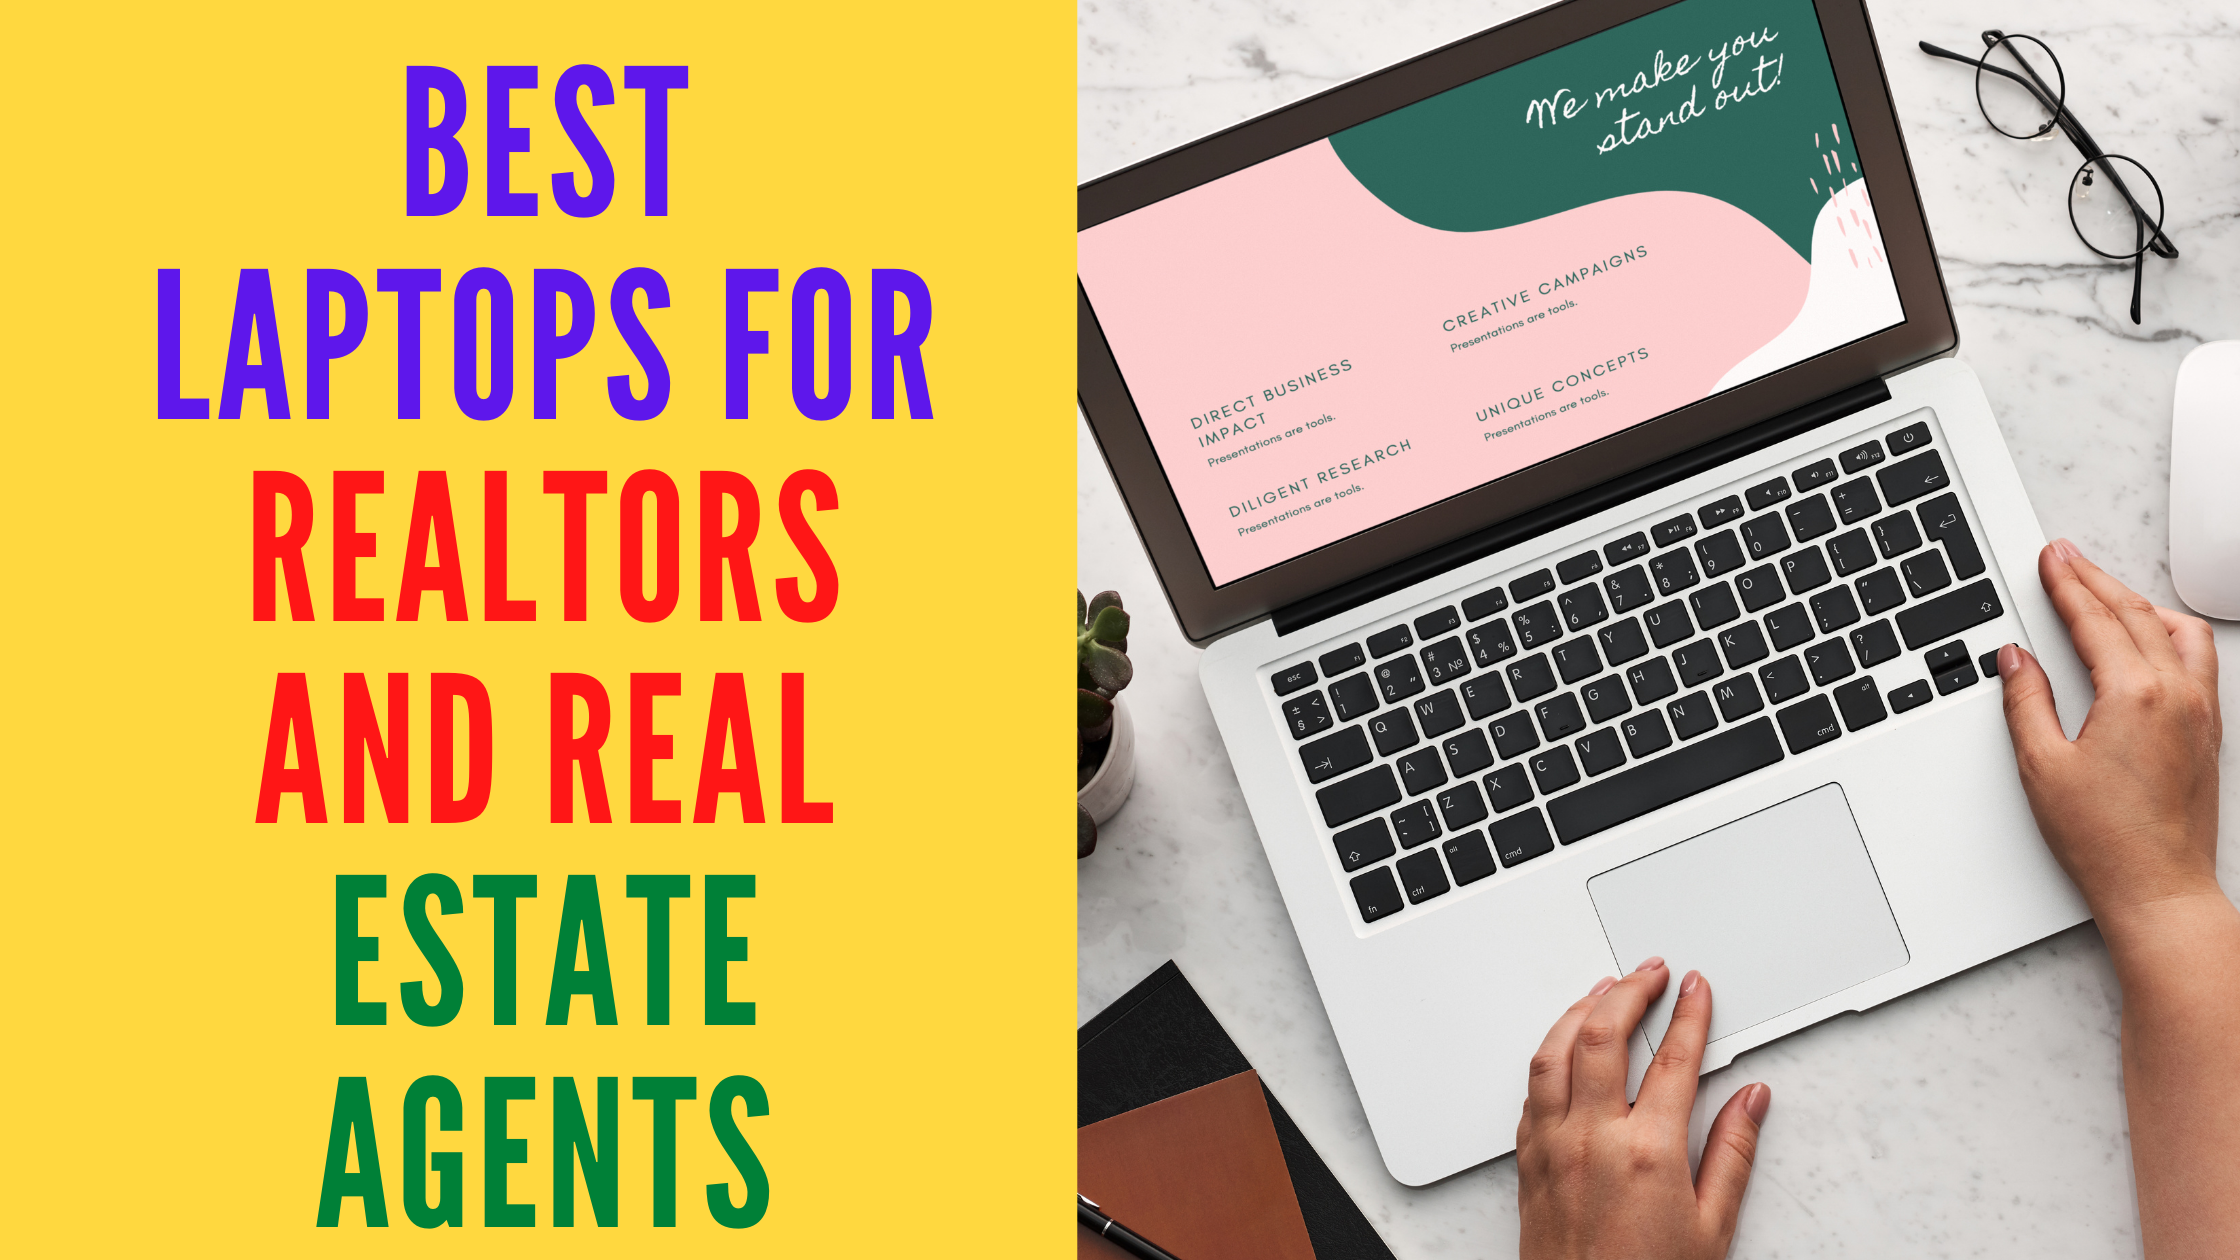 7 Best Laptops for Realtors and Real Estate Agents in 2023